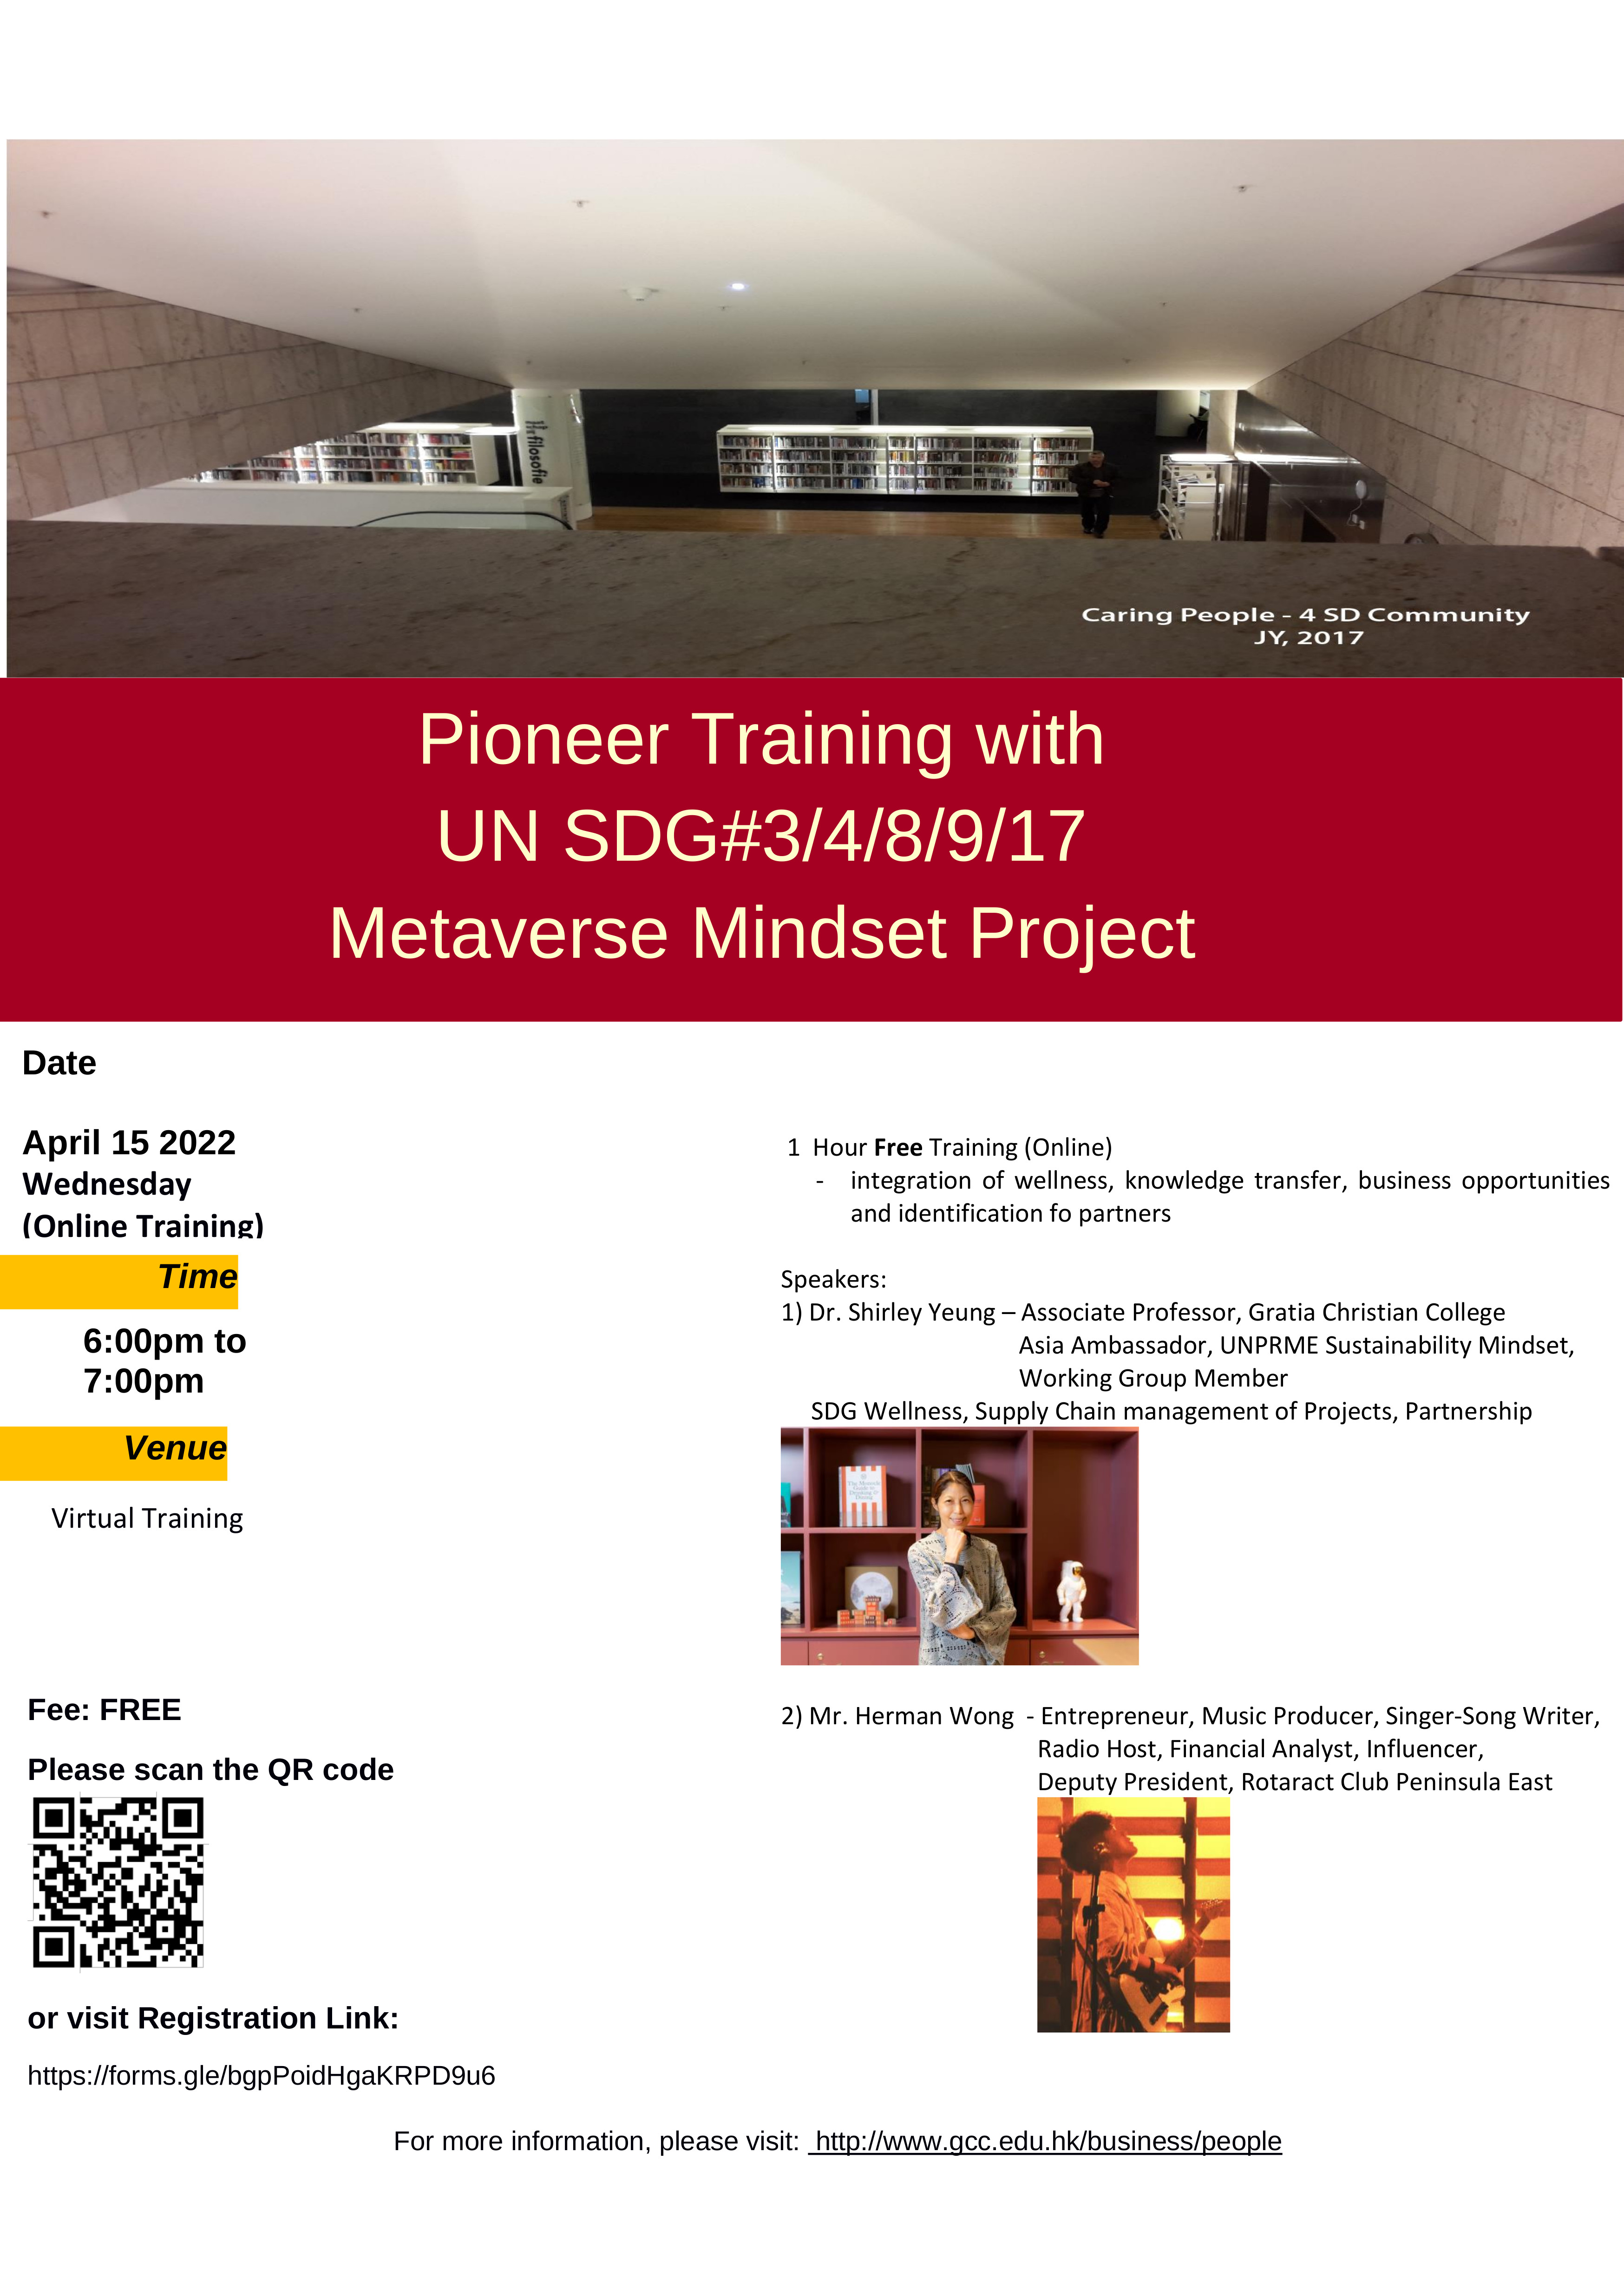 Updated Metaverse Mindset and UNSDGs Pioneer Training for April 2022 from H 20220308 R (1)